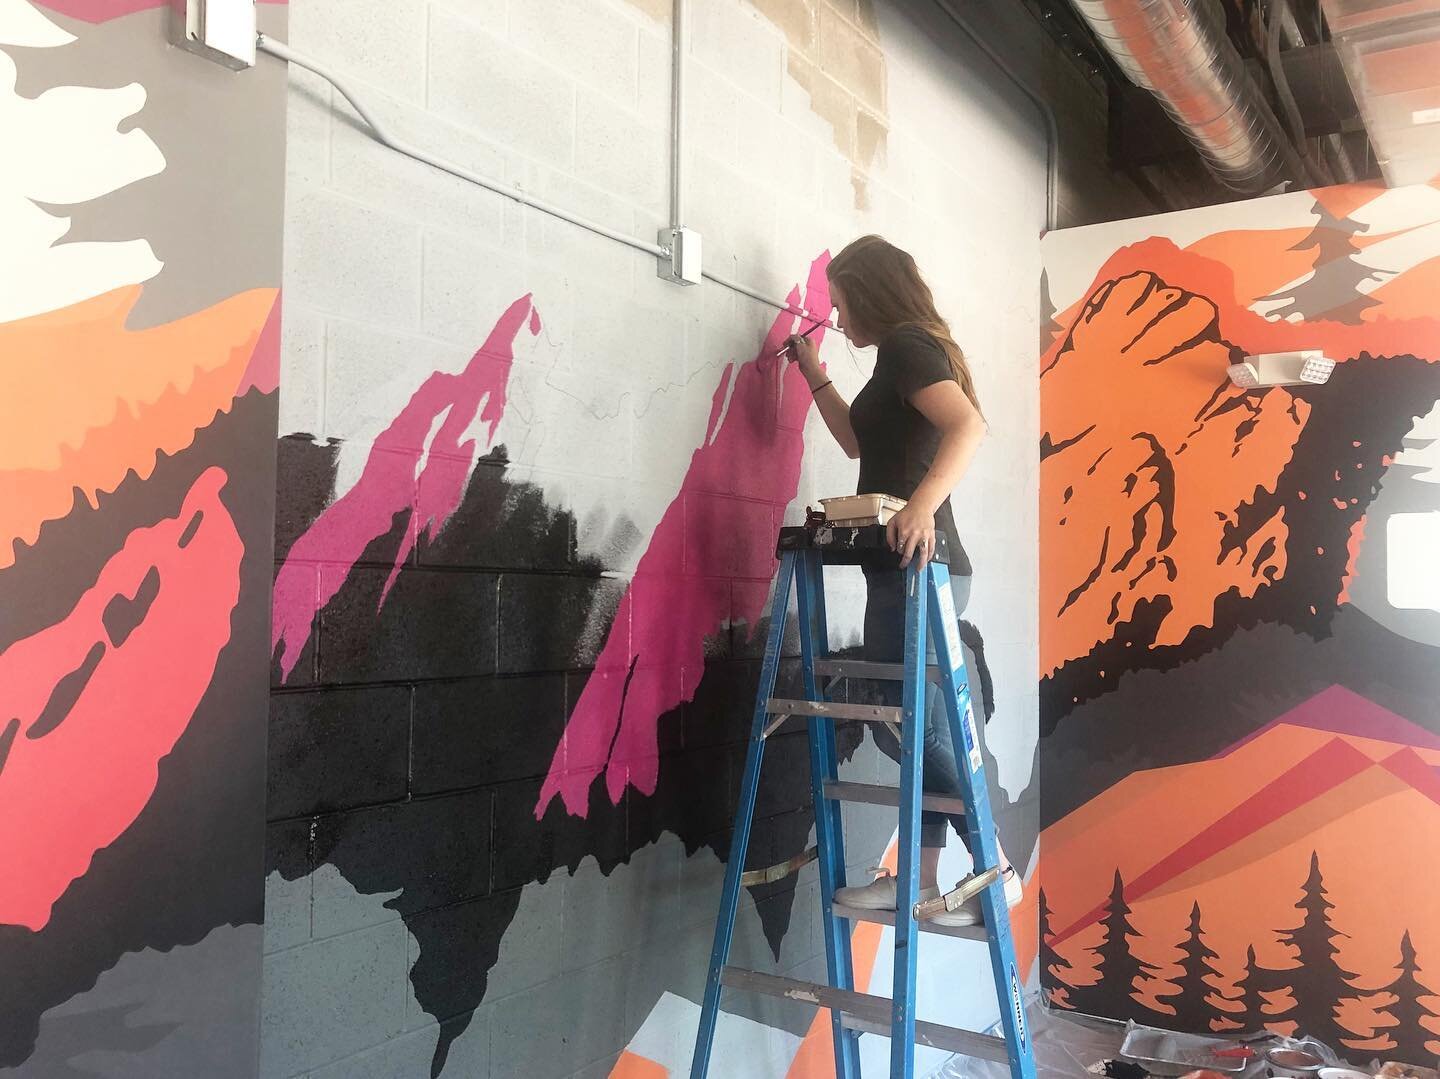 Happy 4th of July weekend! I&rsquo;ll be spending my holiday finishing up this beautiful mural of the Boulder Flatirons for a client but it will be worth it! ✨
.
.
.
#mural #muralartist #muralart #Flatirons #mountains #workinprogress #wip #makersgonn